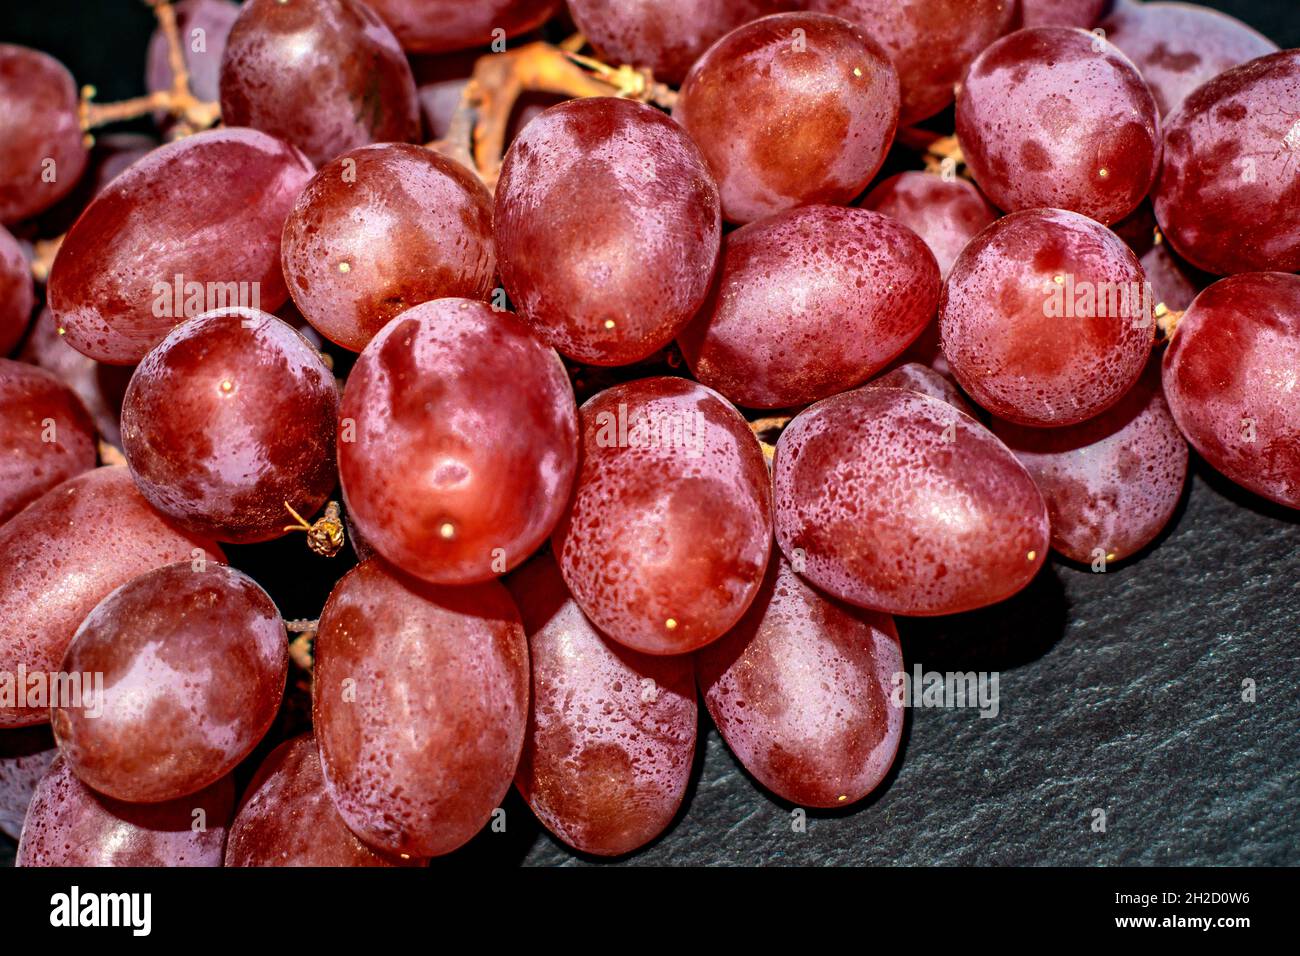 Fruit : Red grapes Stock Photo